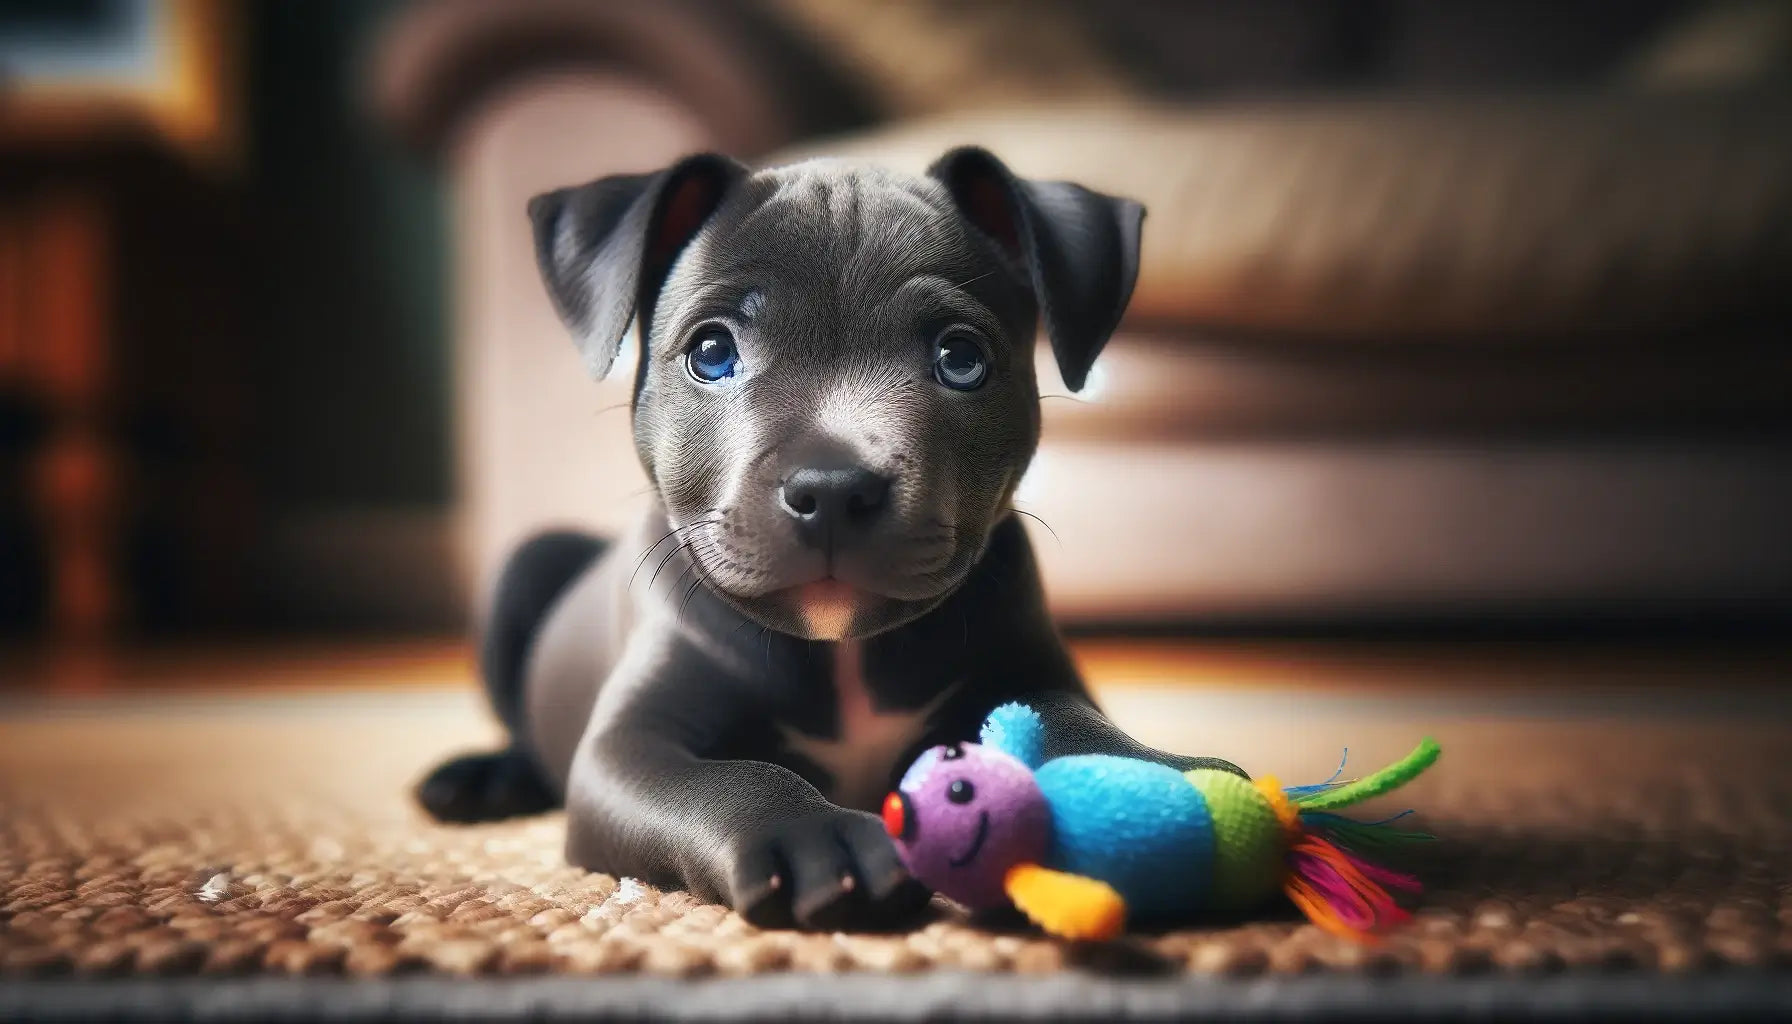 Blue Staffy with bright eyes and a soft youthful coat lying on the ground with a colorful toy nearby.